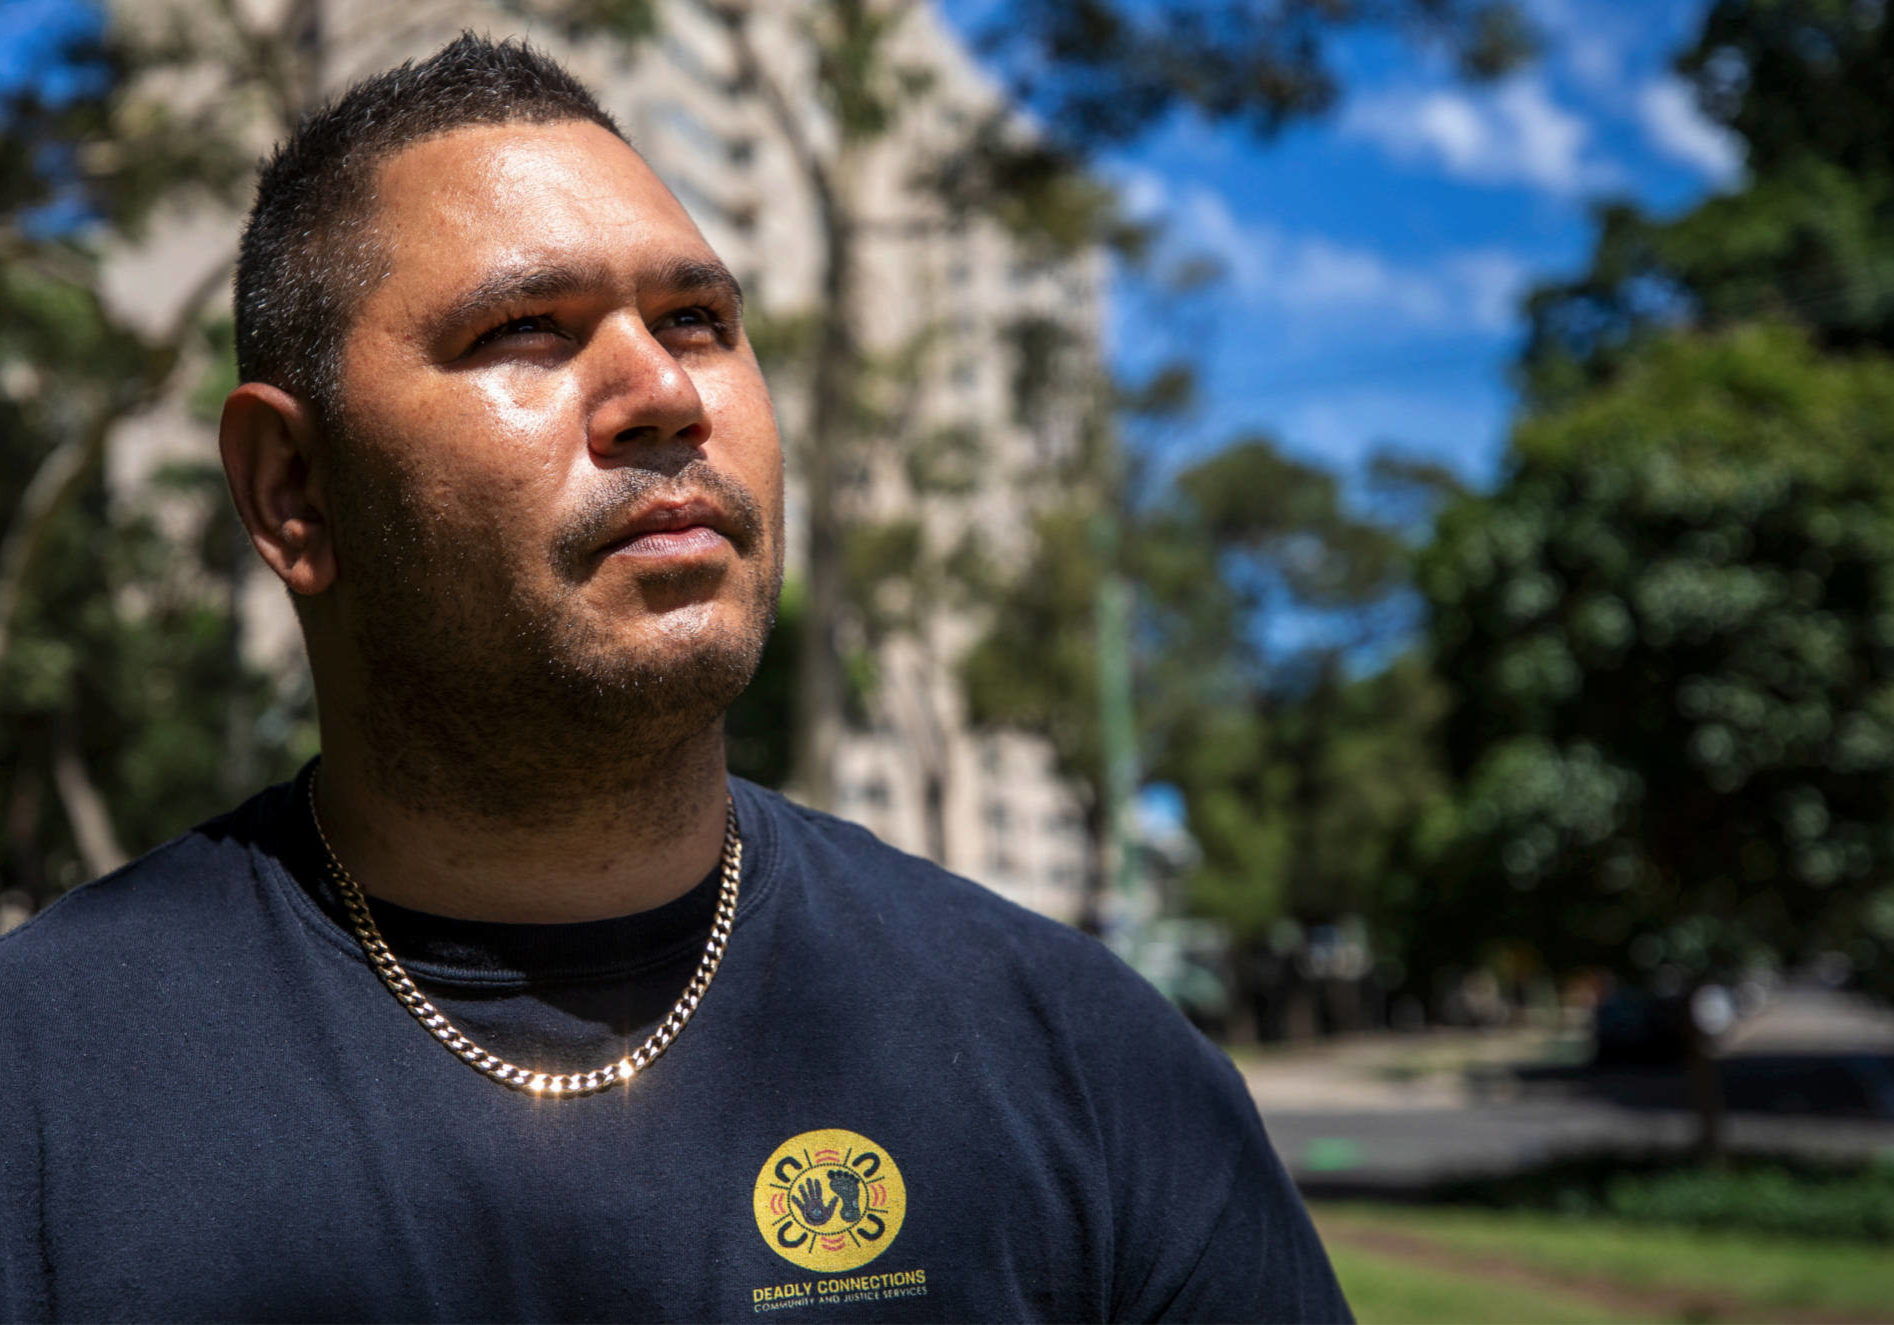 Keenan Mundine is pictured looking up. he wears a black shirt that says 'Deadly Connections'. From film INCARCERATION NATION